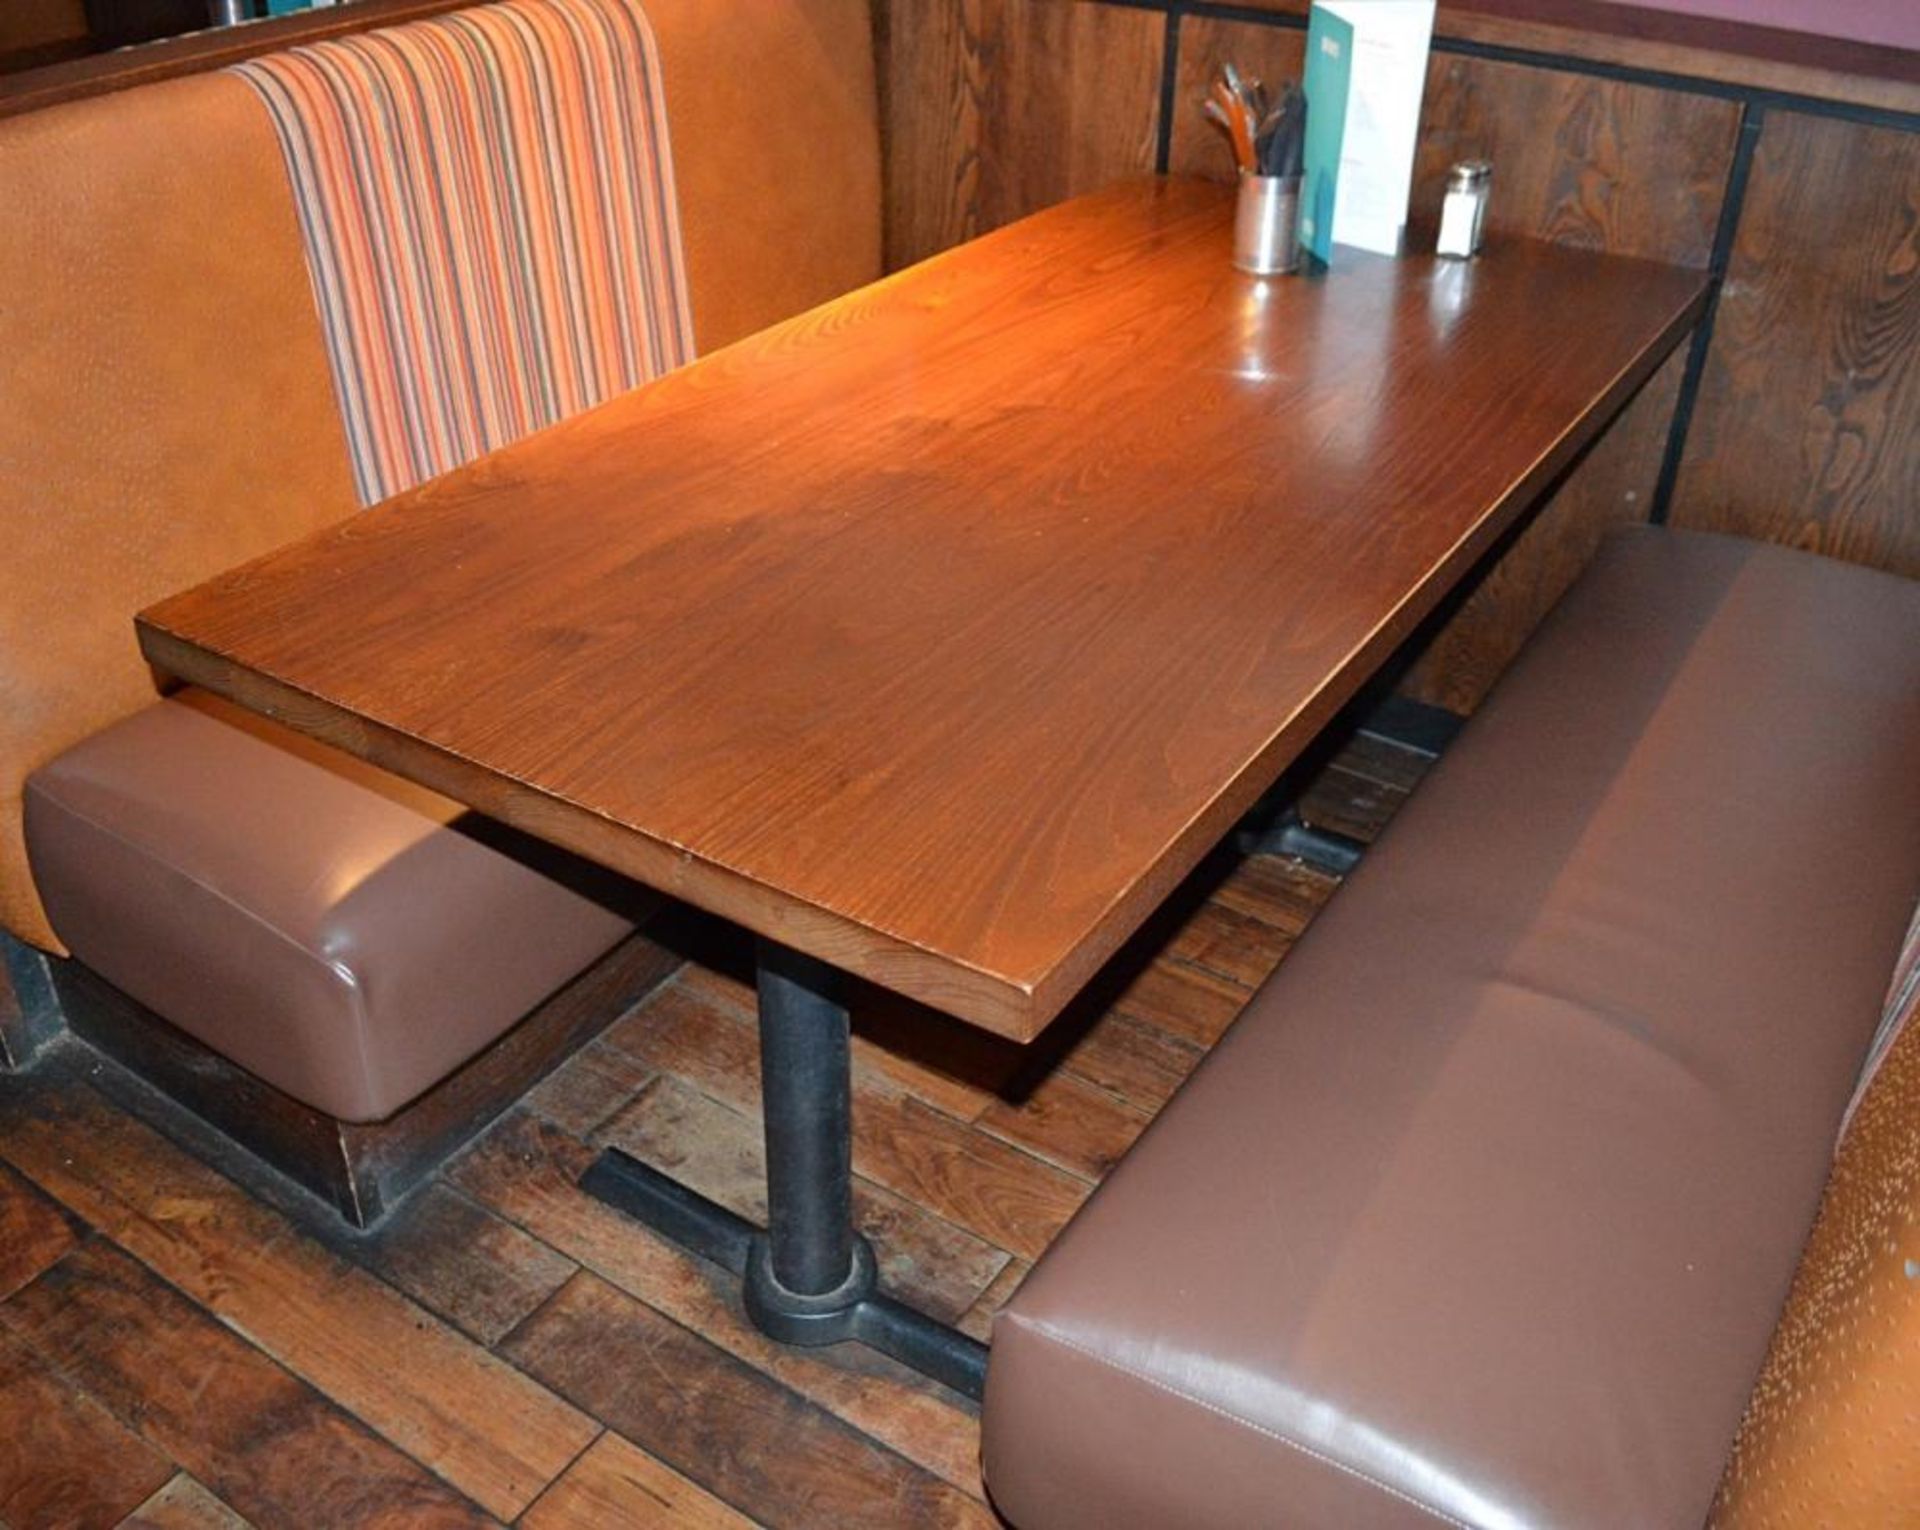 6 x Large Wooden Rectangular Restaurant Tables With Cast Iron Bases - Dimensions: H75 x W120 x D75cm